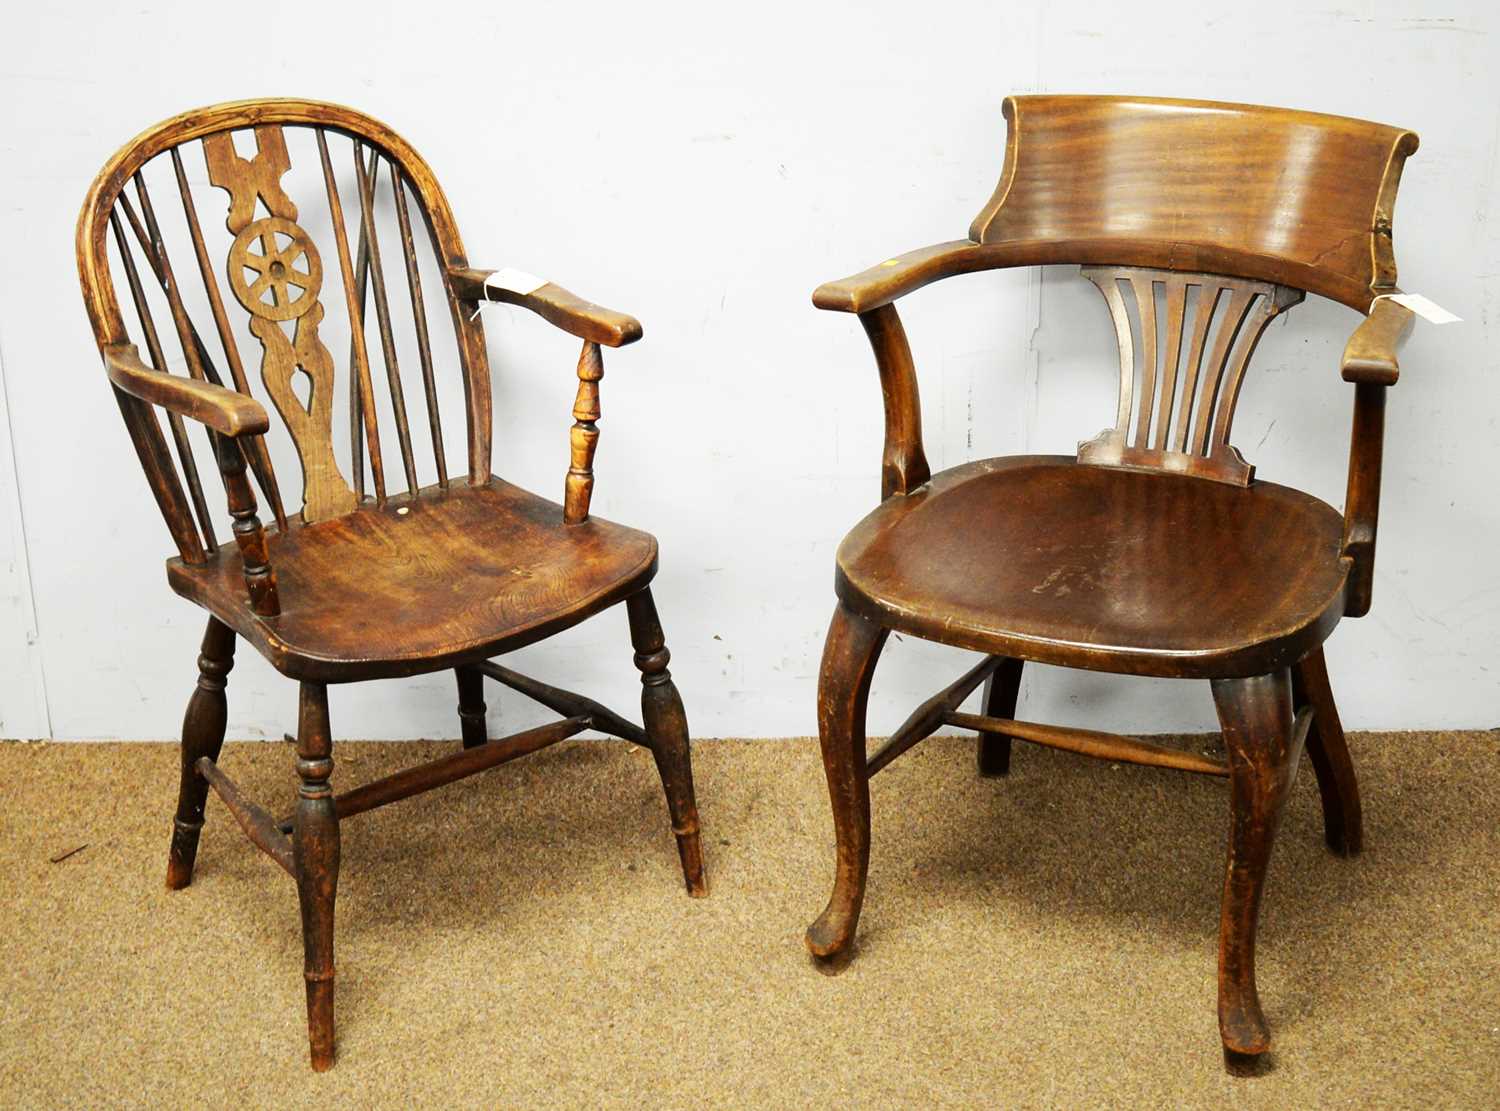 Lot 2 - Late 19th Century ash and elm Windsor chair and another